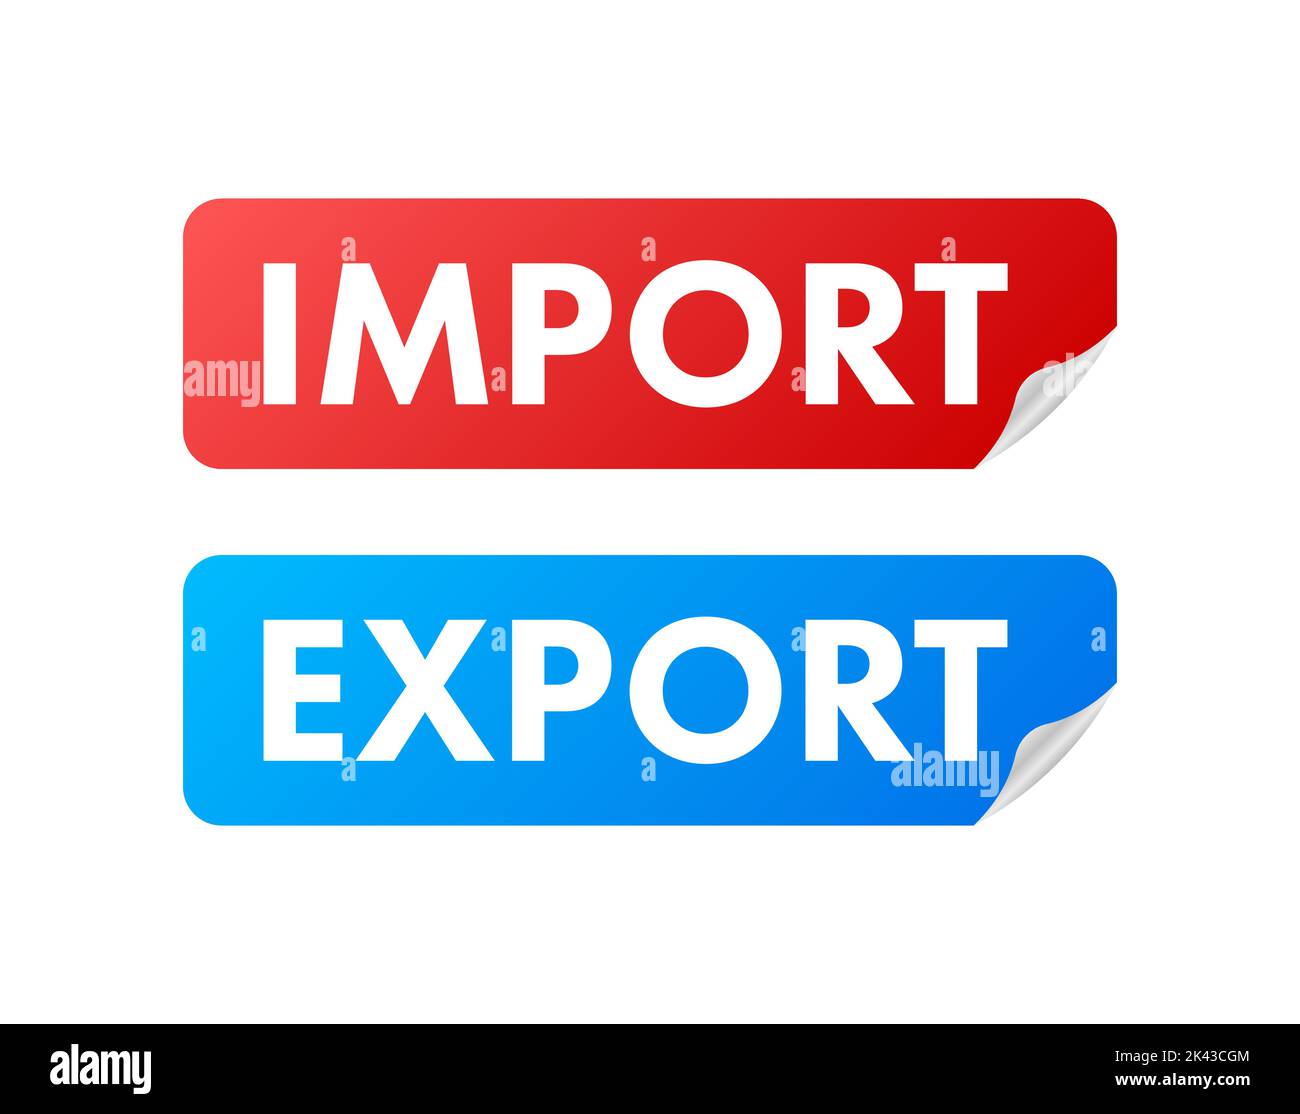 Port crane lift two red cargo containers with import and export words. Vector stock illustration. Stock Vector